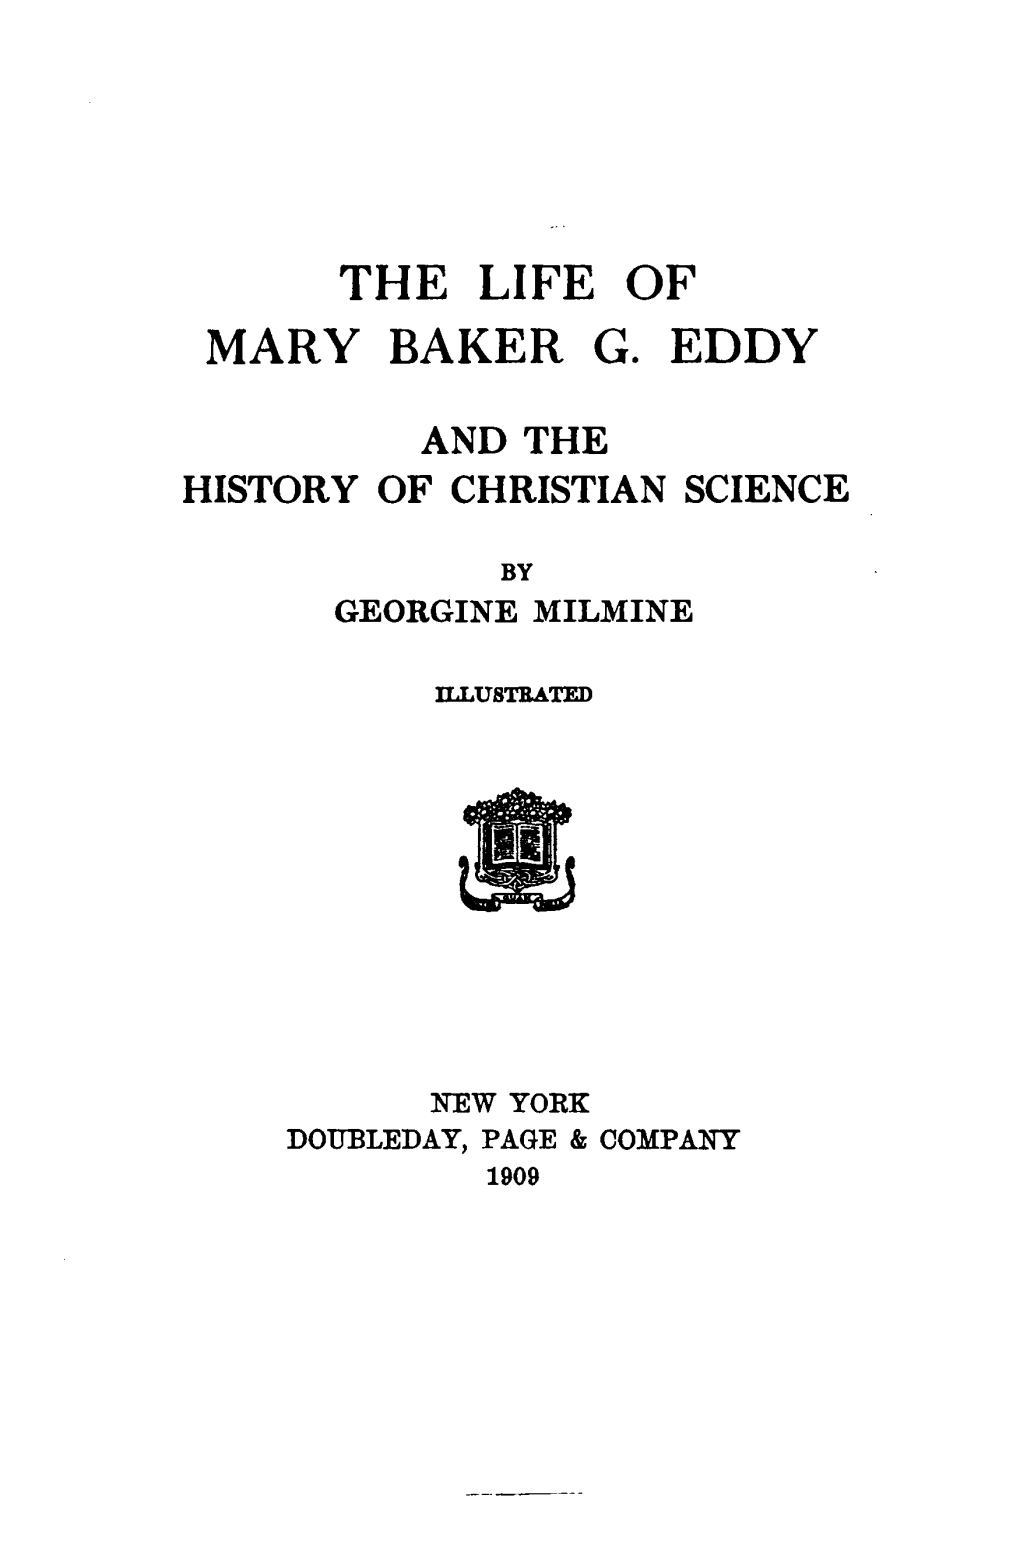 The Life of Mary Baker Eddy and the History of Christian Science